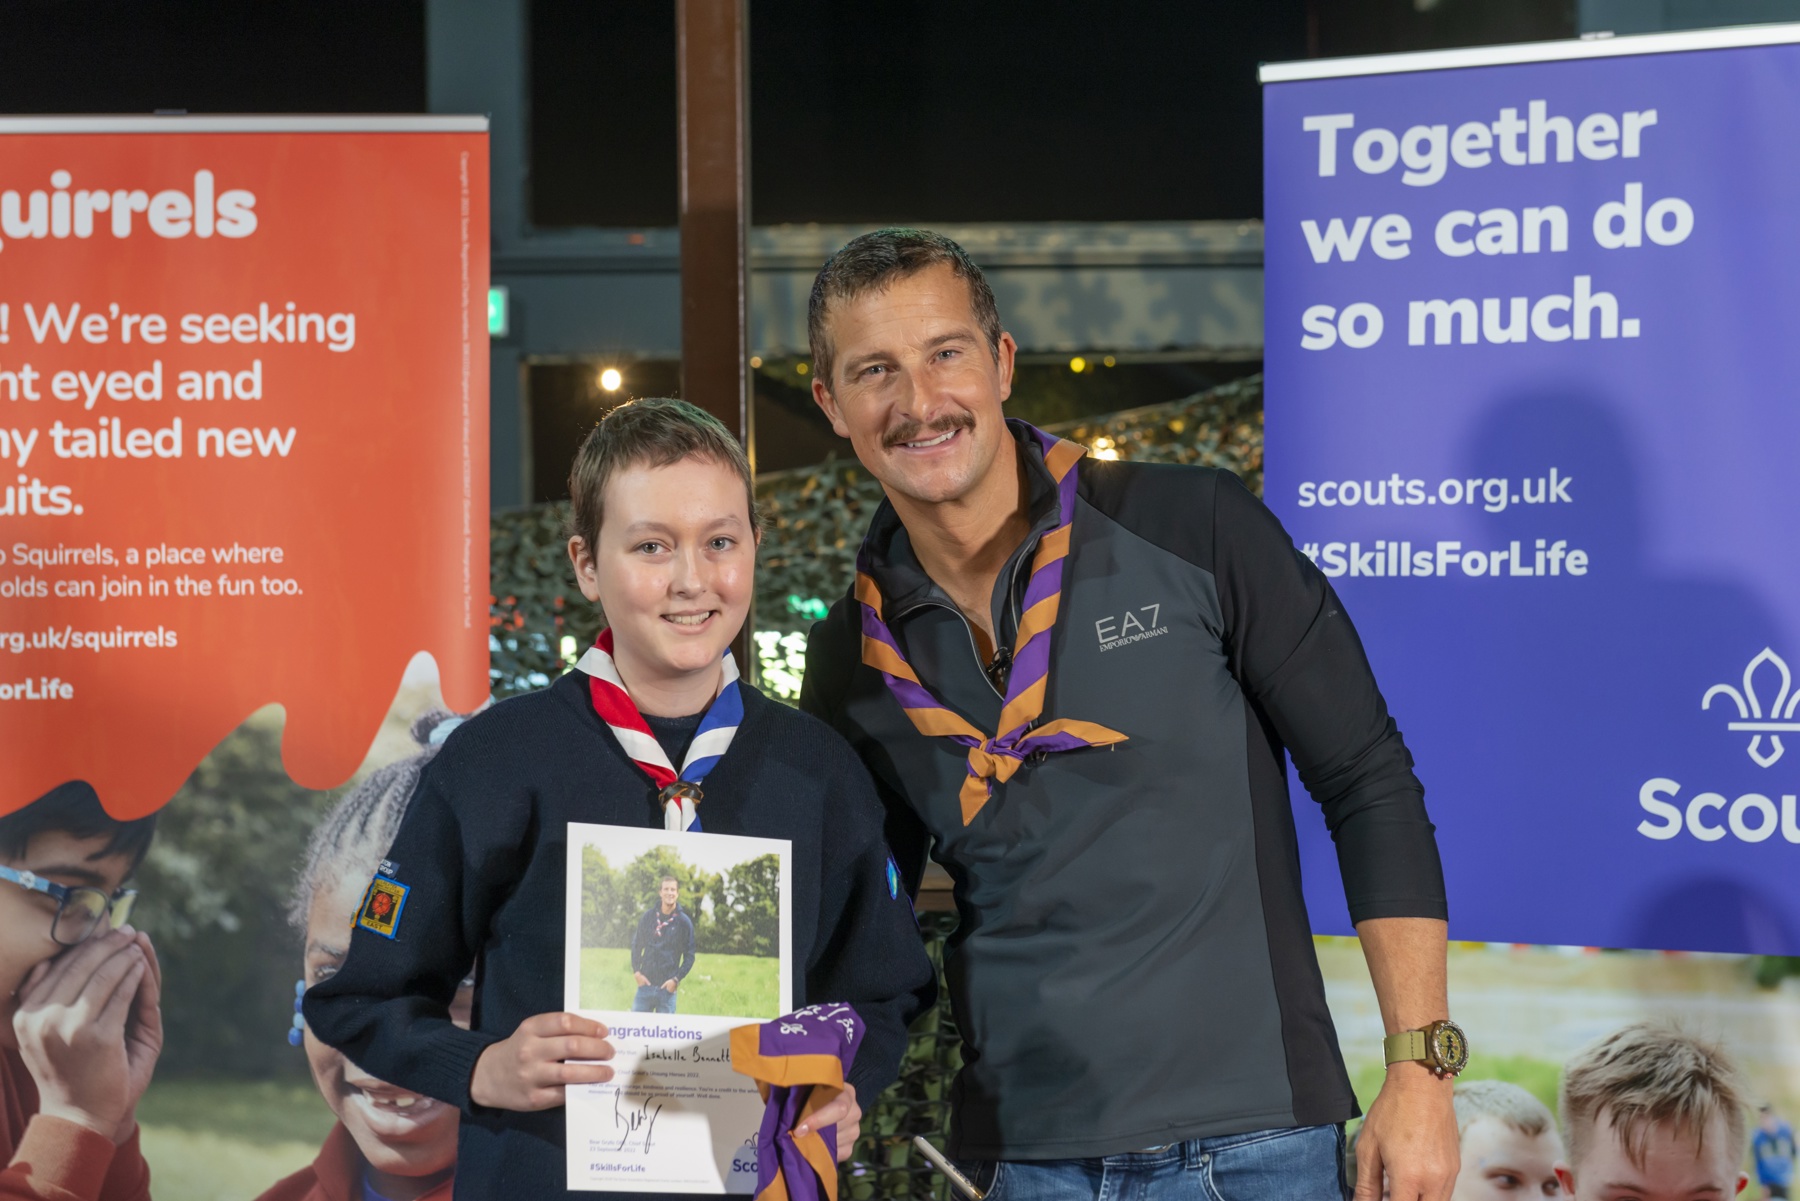 Isabelle is wearing her uniform and necker, holding a 'congratulations' certificate and an orange and purple 'never give up' necker. She's stood next to Bear Grylls, who's wearing an orange and purple necker, and they're both smiling at the camera.